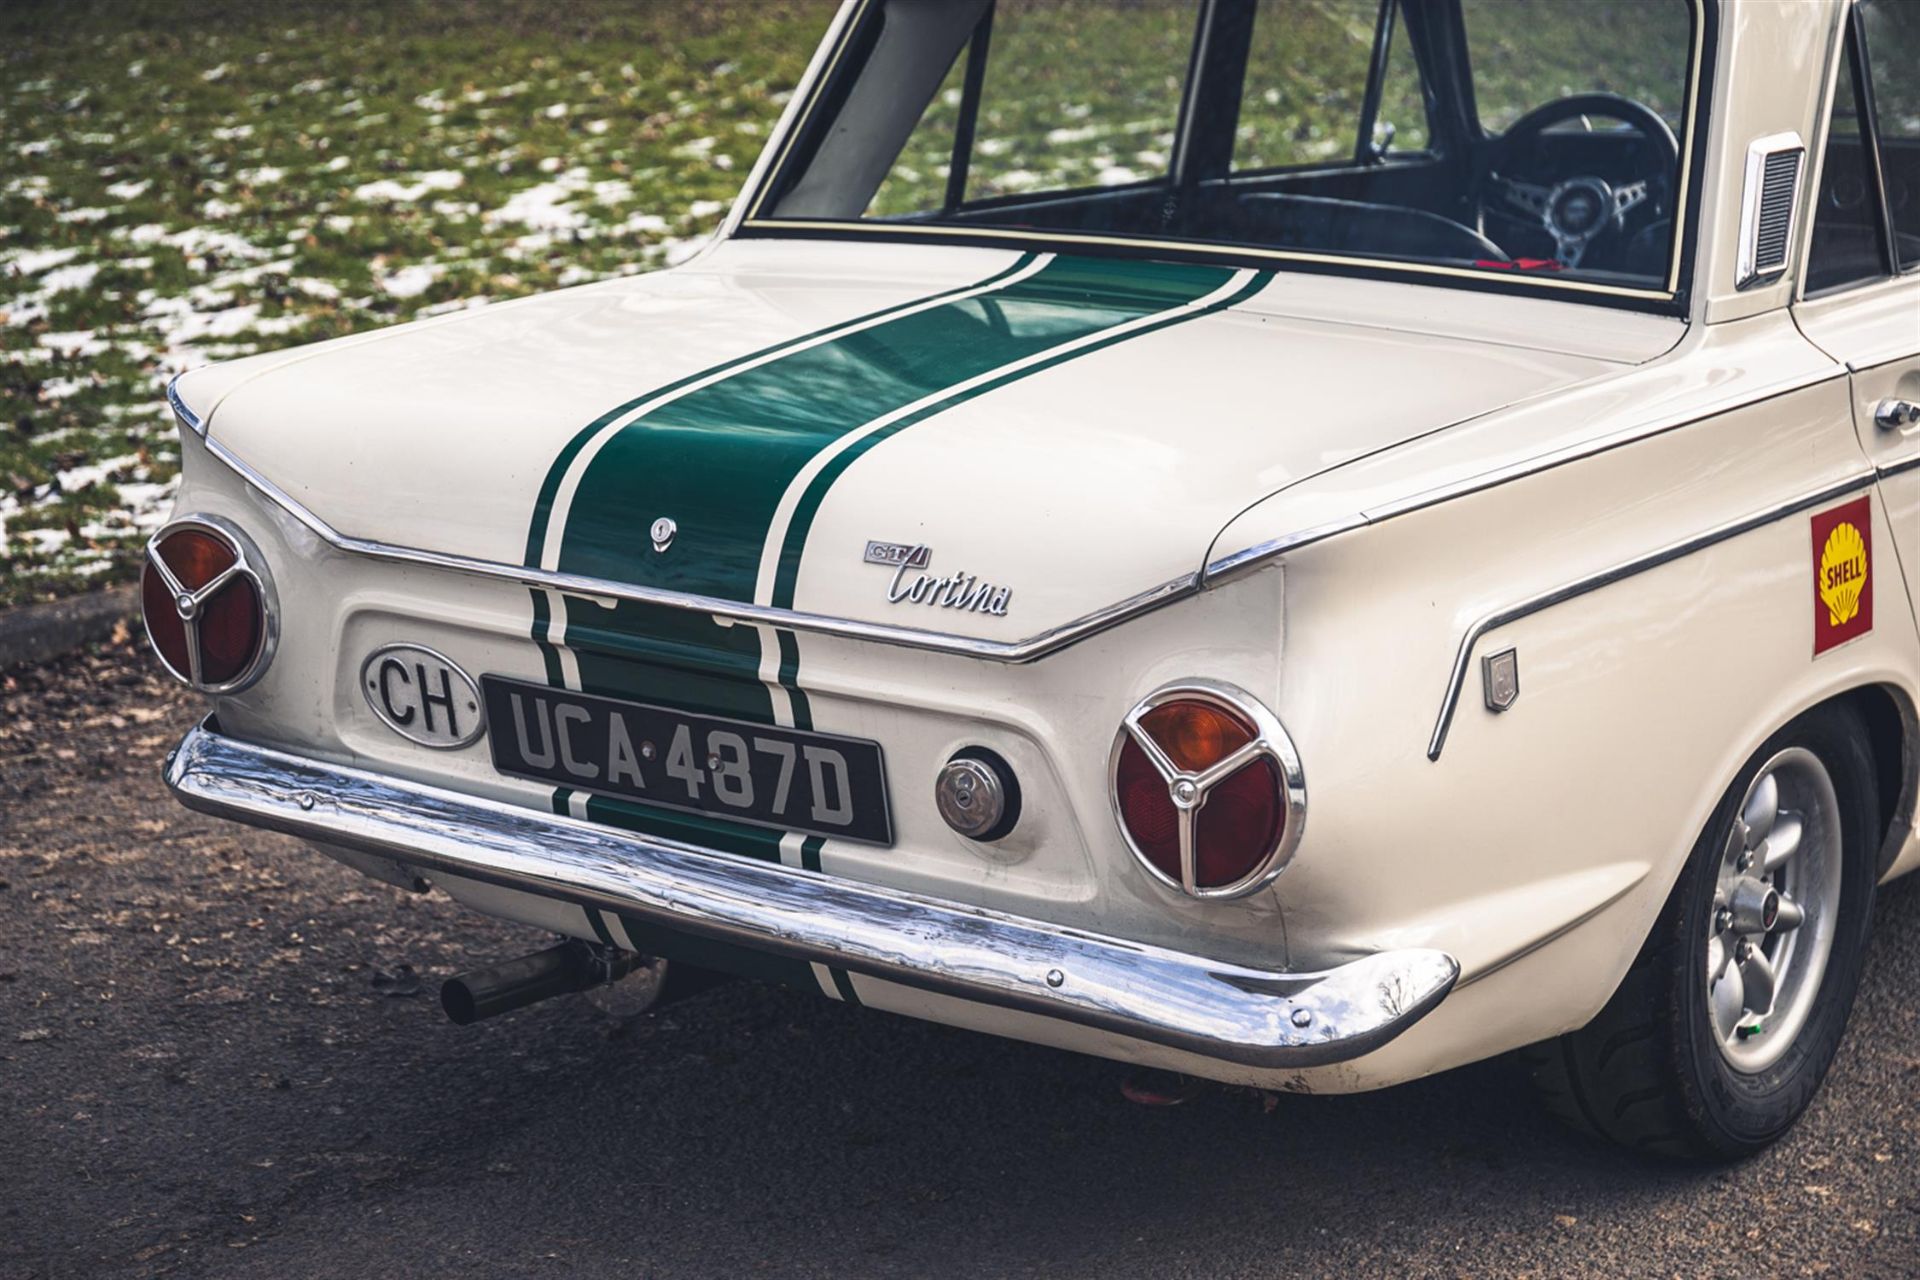 1966 Ford Cortina GT (Mk1) Four-Door Rally Car (LHD) - Image 10 of 10